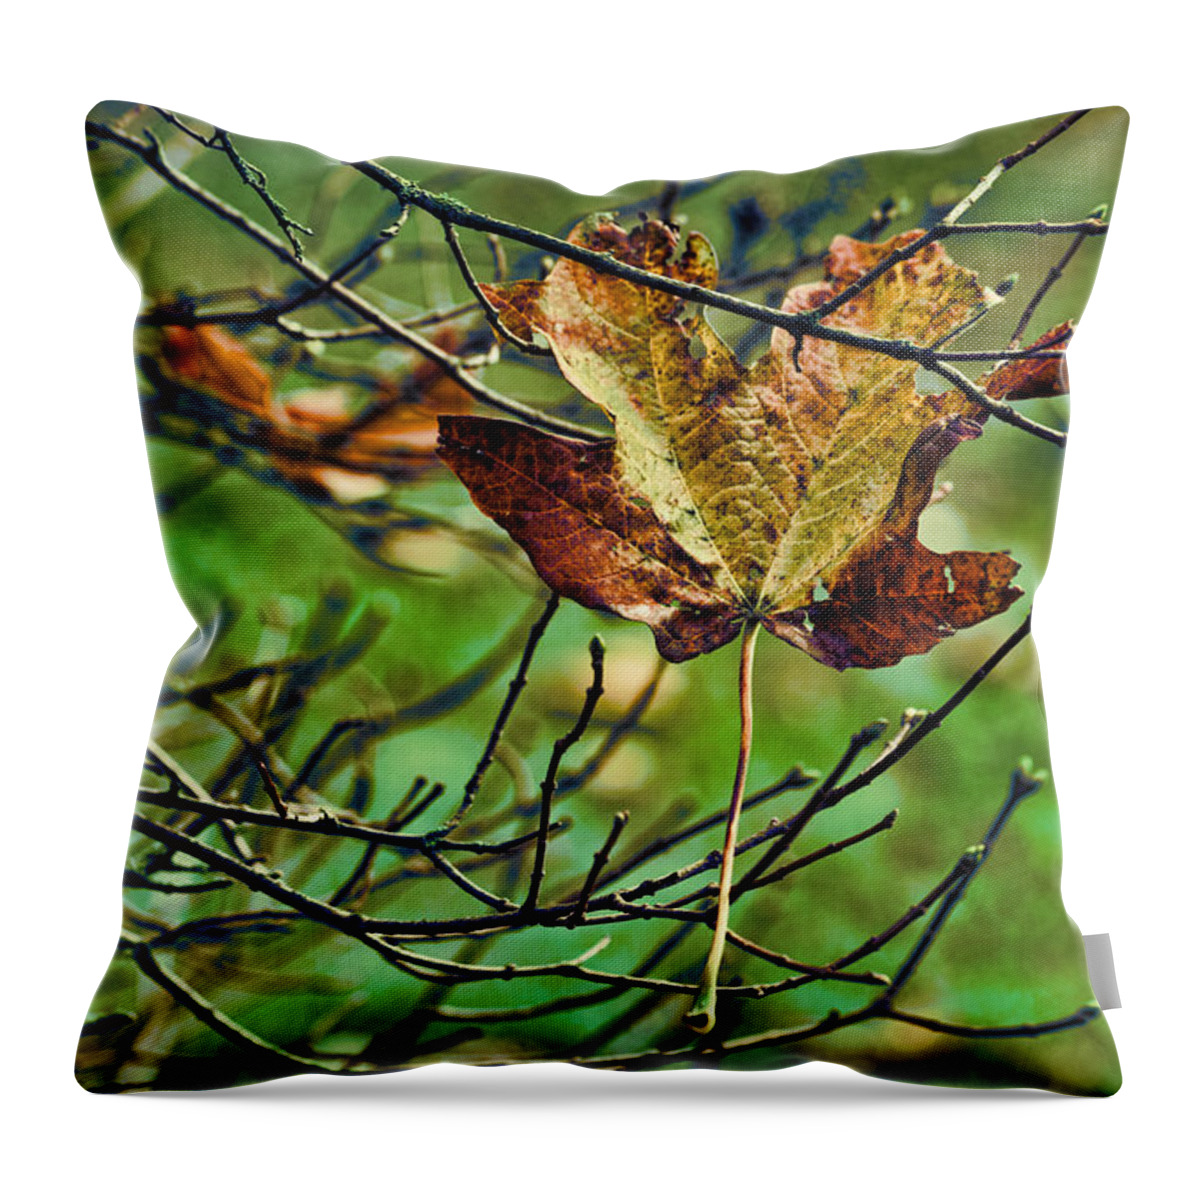 Fallen Leaf Throw Pillow featuring the photograph Trapped by Bonnie Bruno